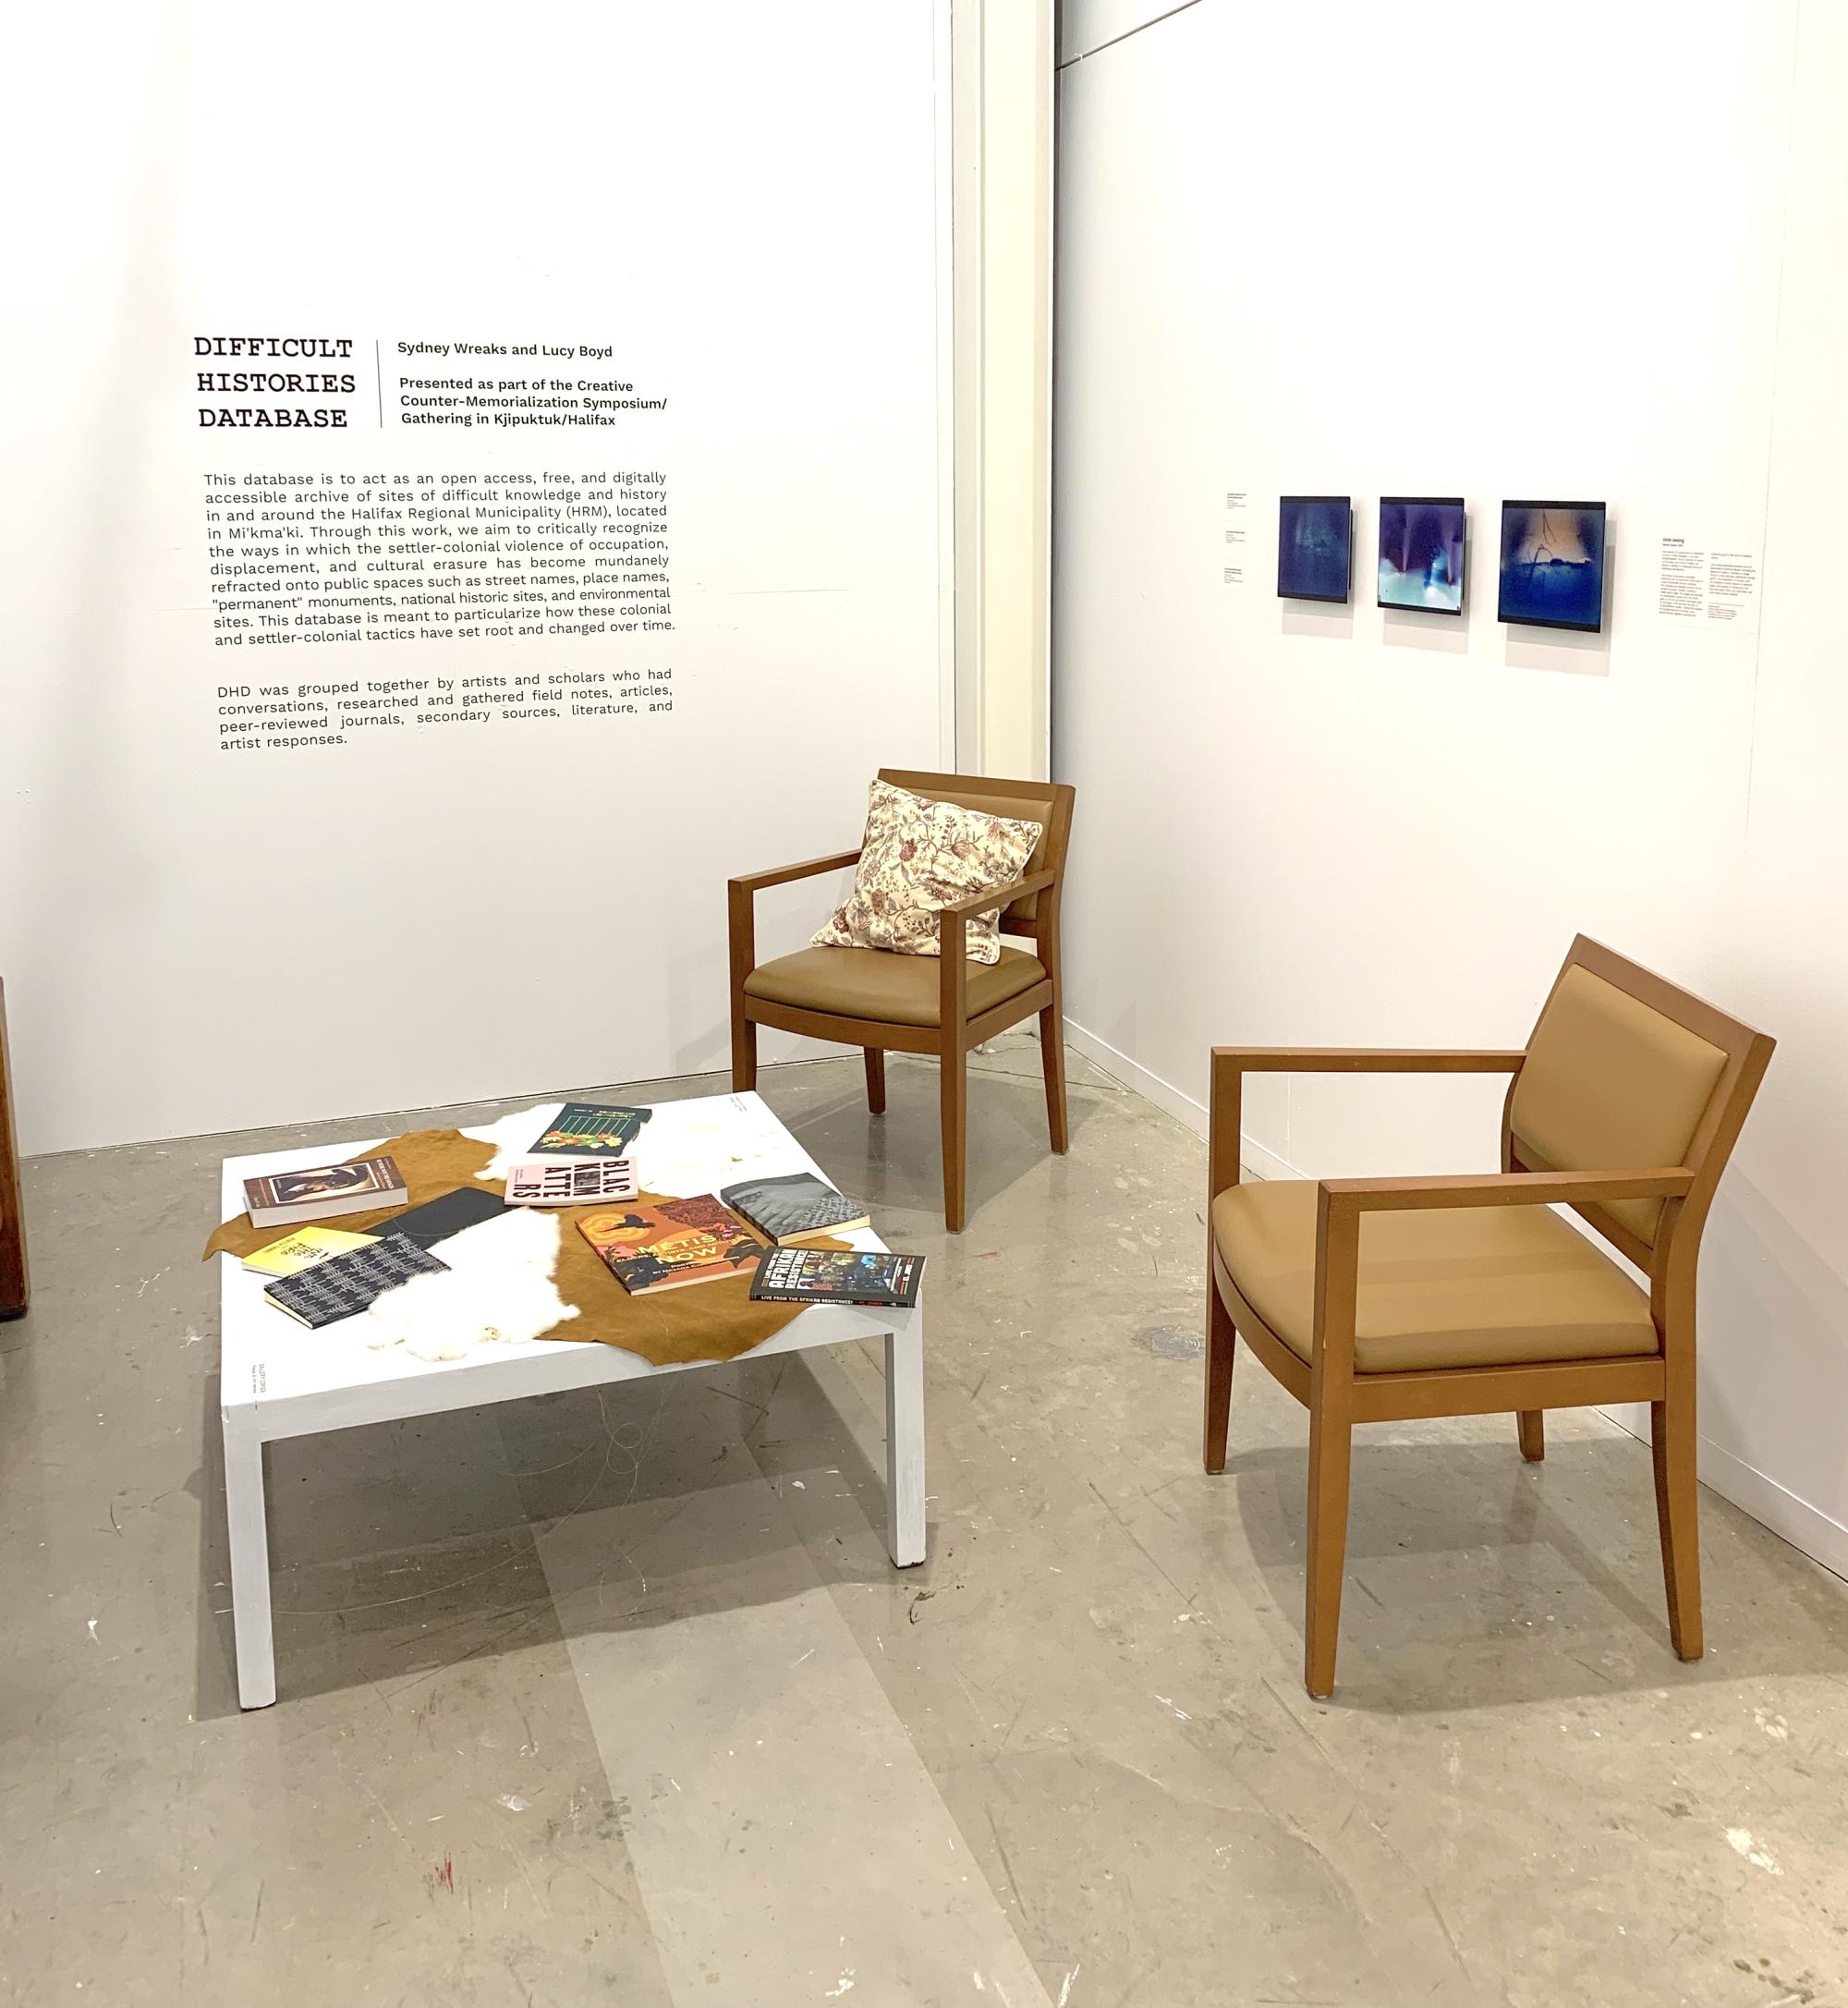 two chairs surround a white coffee table with various books, 3 artwork prints are on the wall behind the chairs, exhibition black vinyl text on adjoining wall